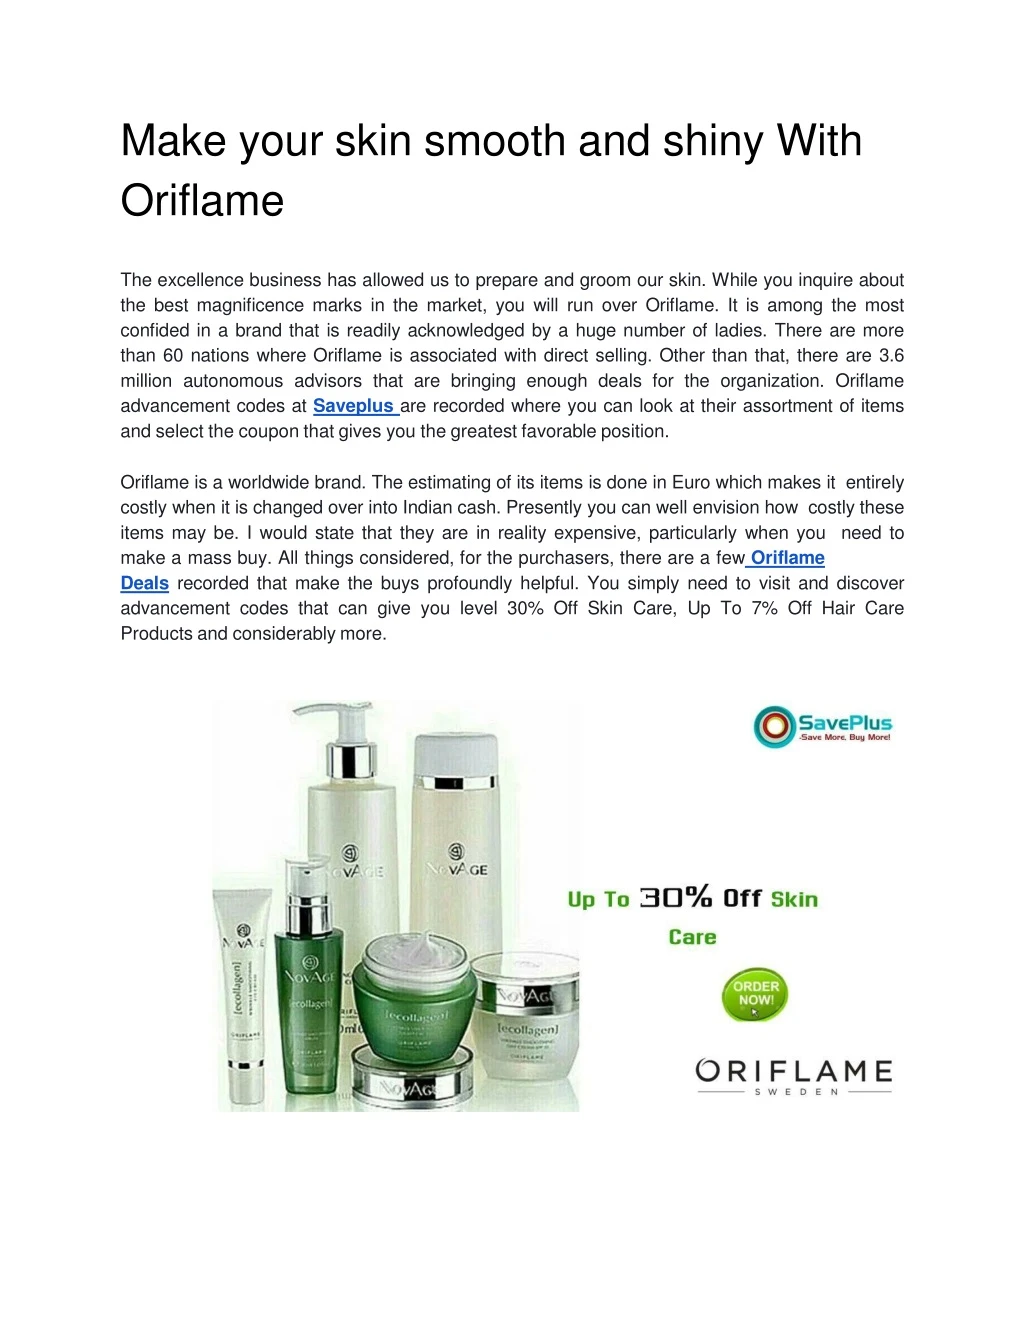 make your skin smooth and shiny with oriflame